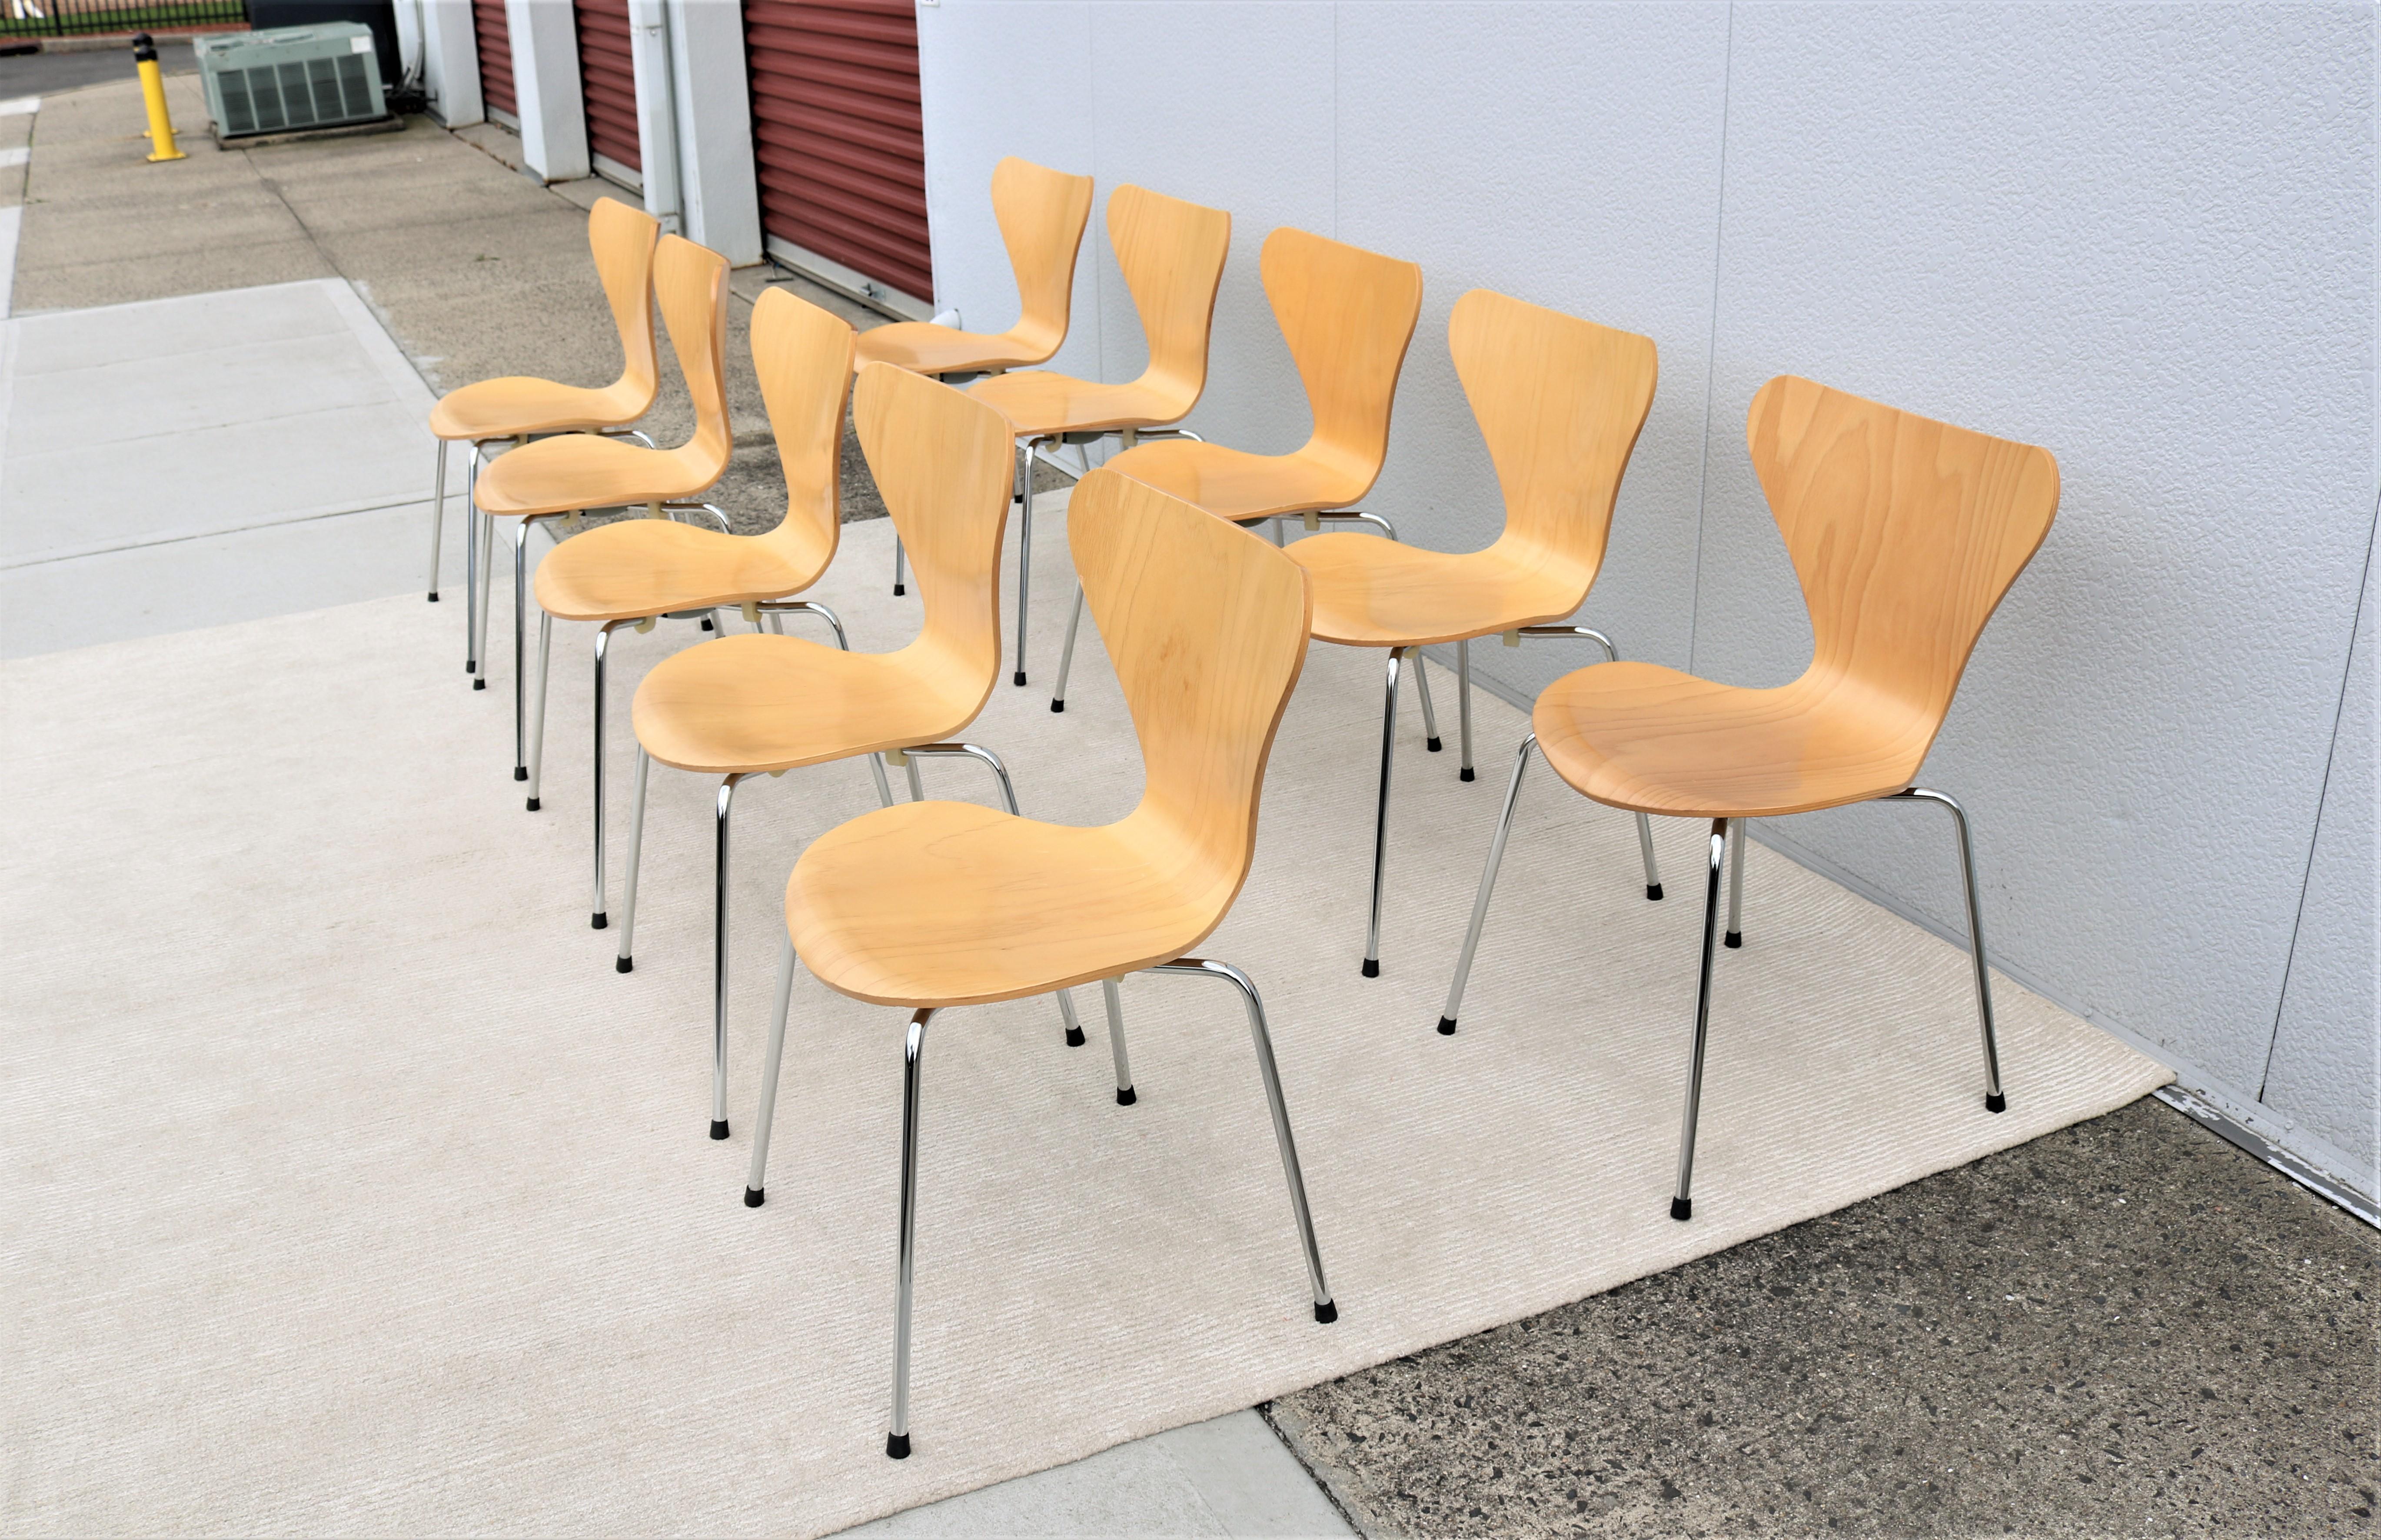 Contemporary Danish Mid-Century Modern Arne Jacobsen Style Series 7 Chairs, Set of 10